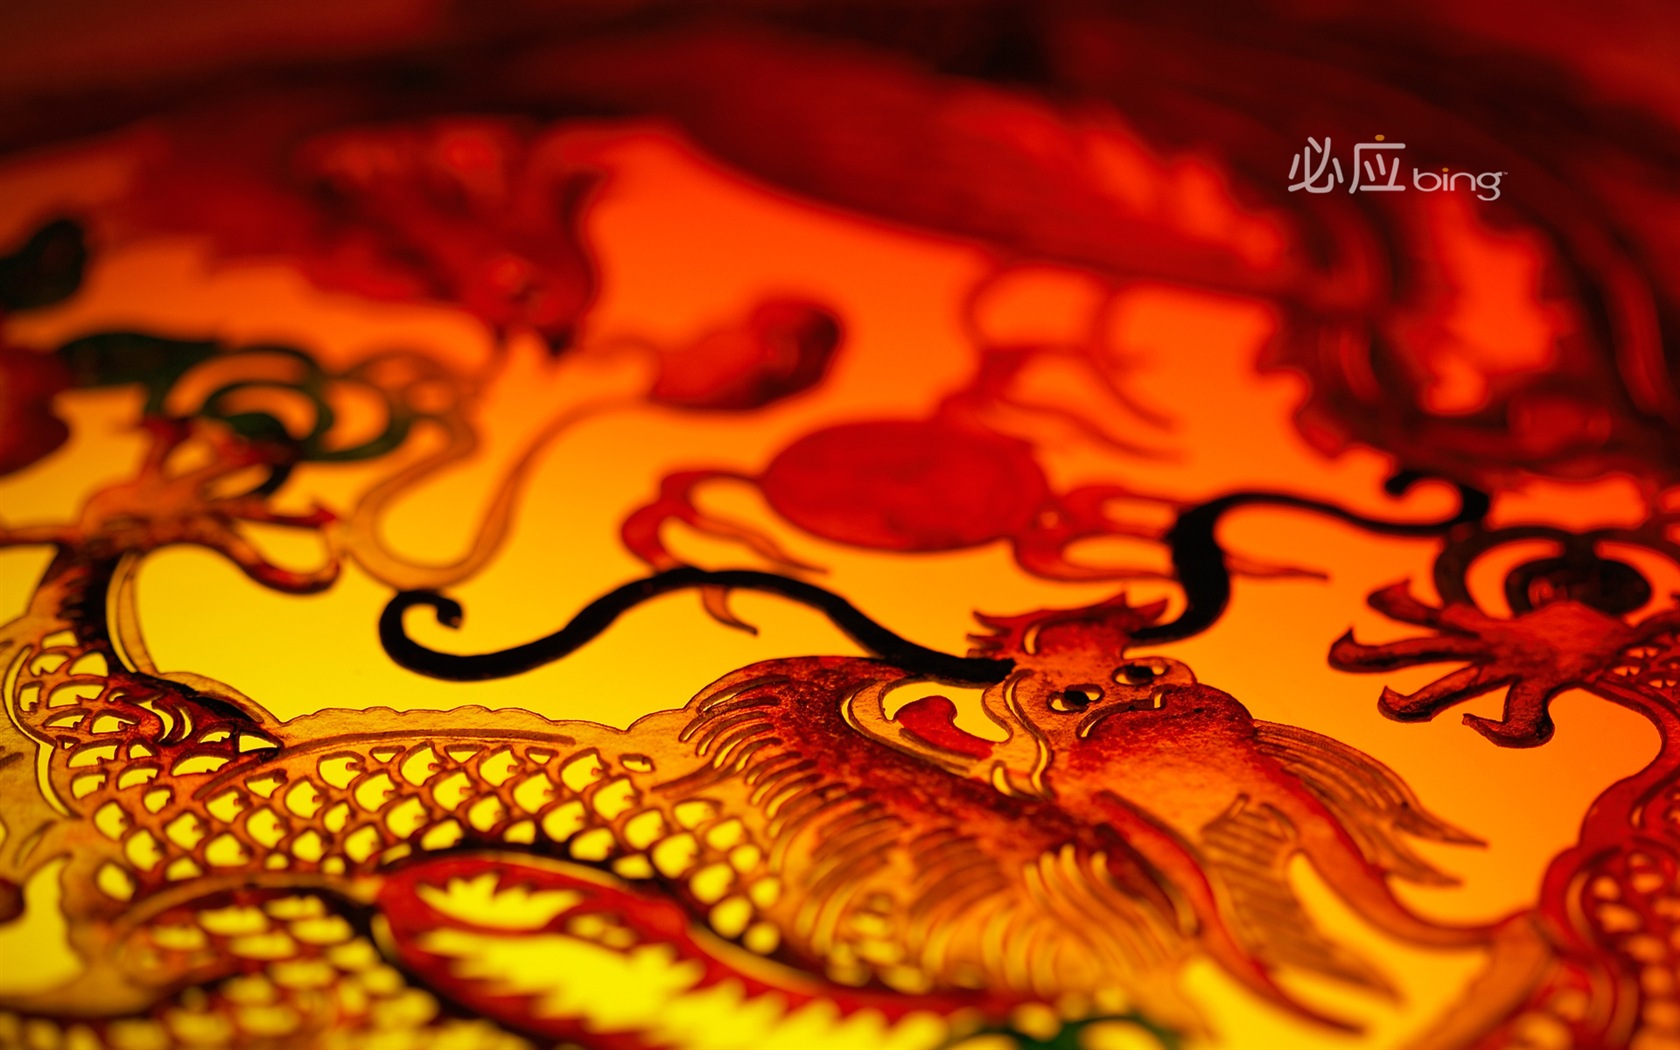 Bing selection best HD wallpapers: China theme wallpaper (2) #12 - 1680x1050